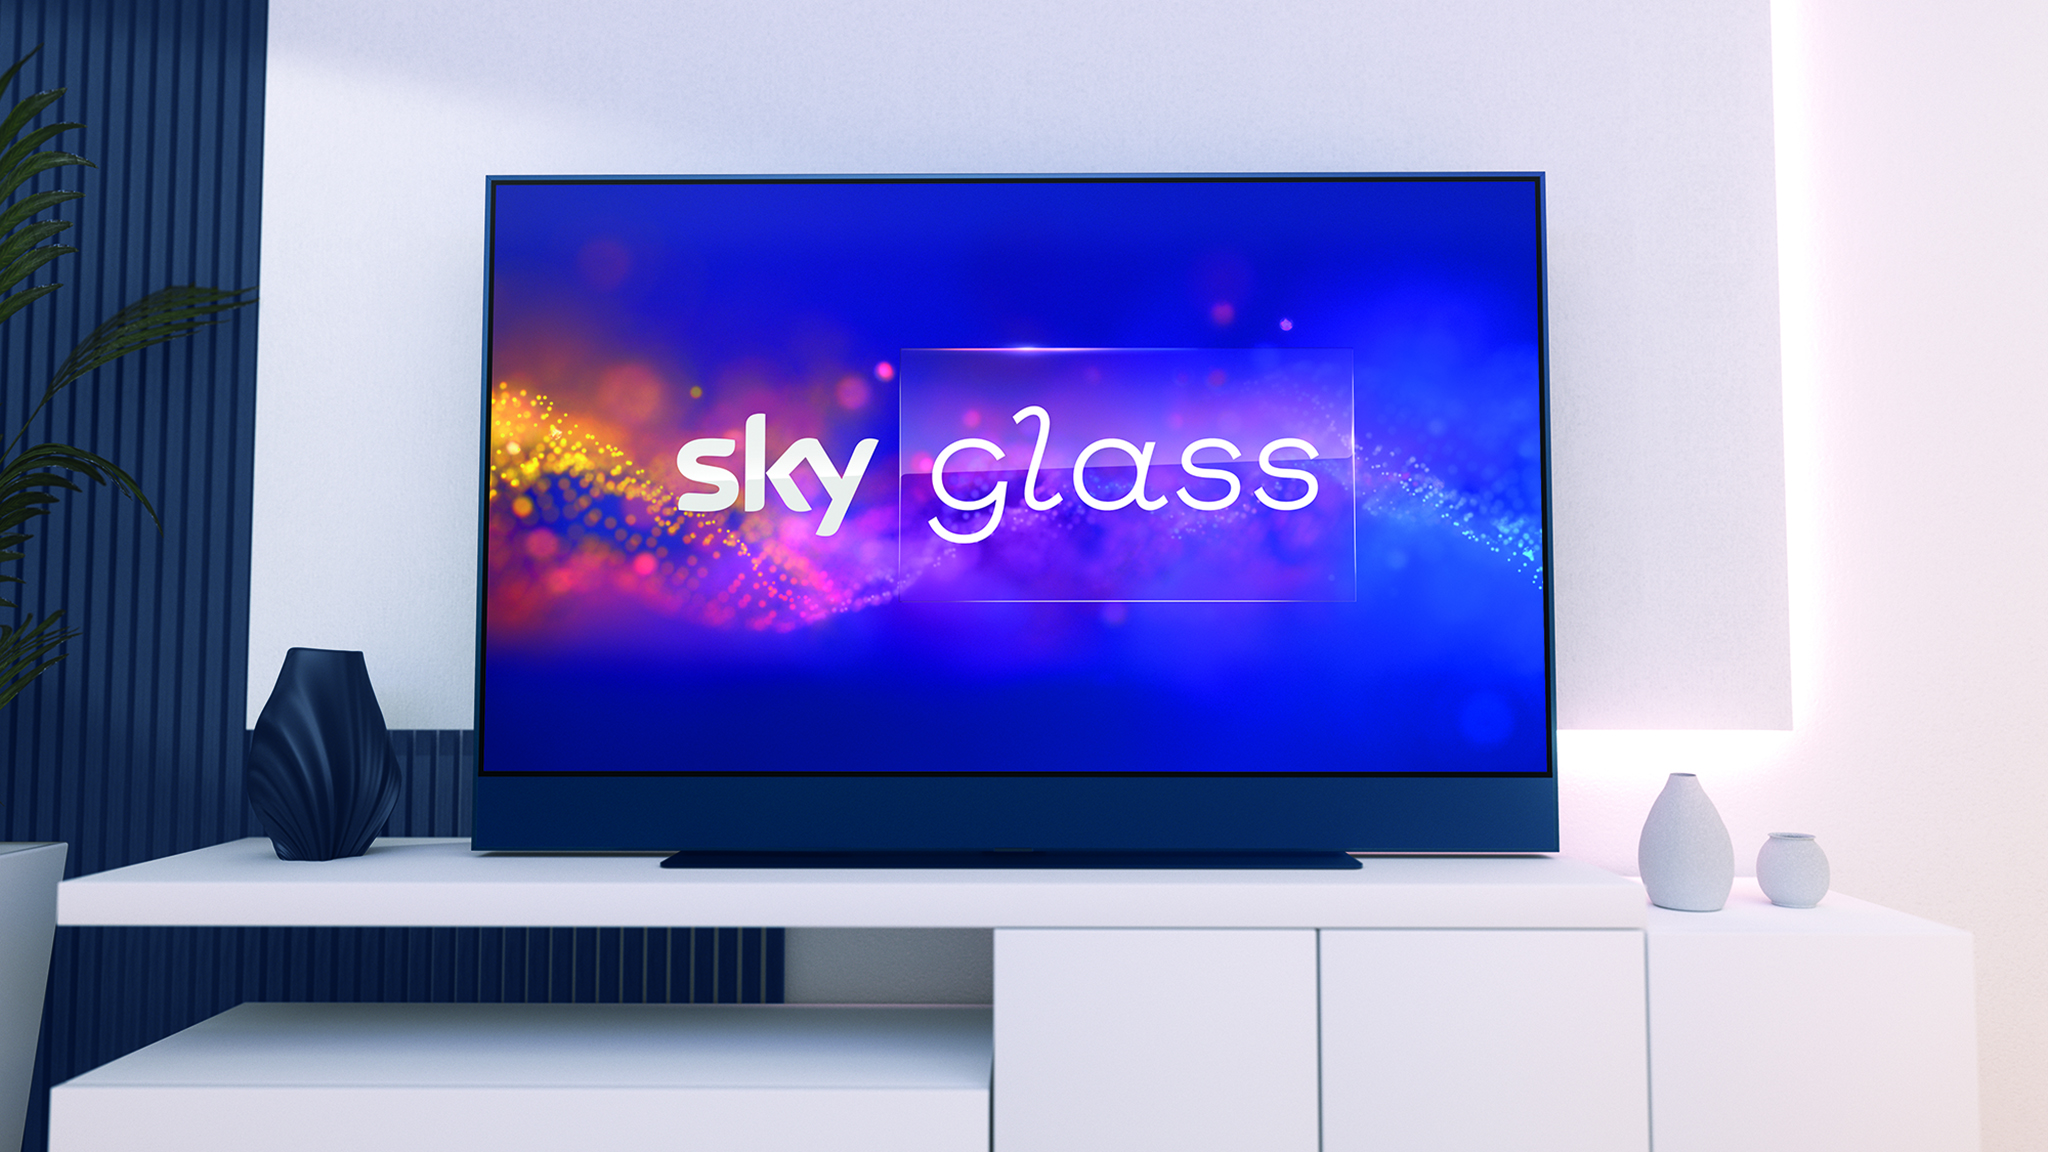 Sky Glass – Looking Beyond The Product